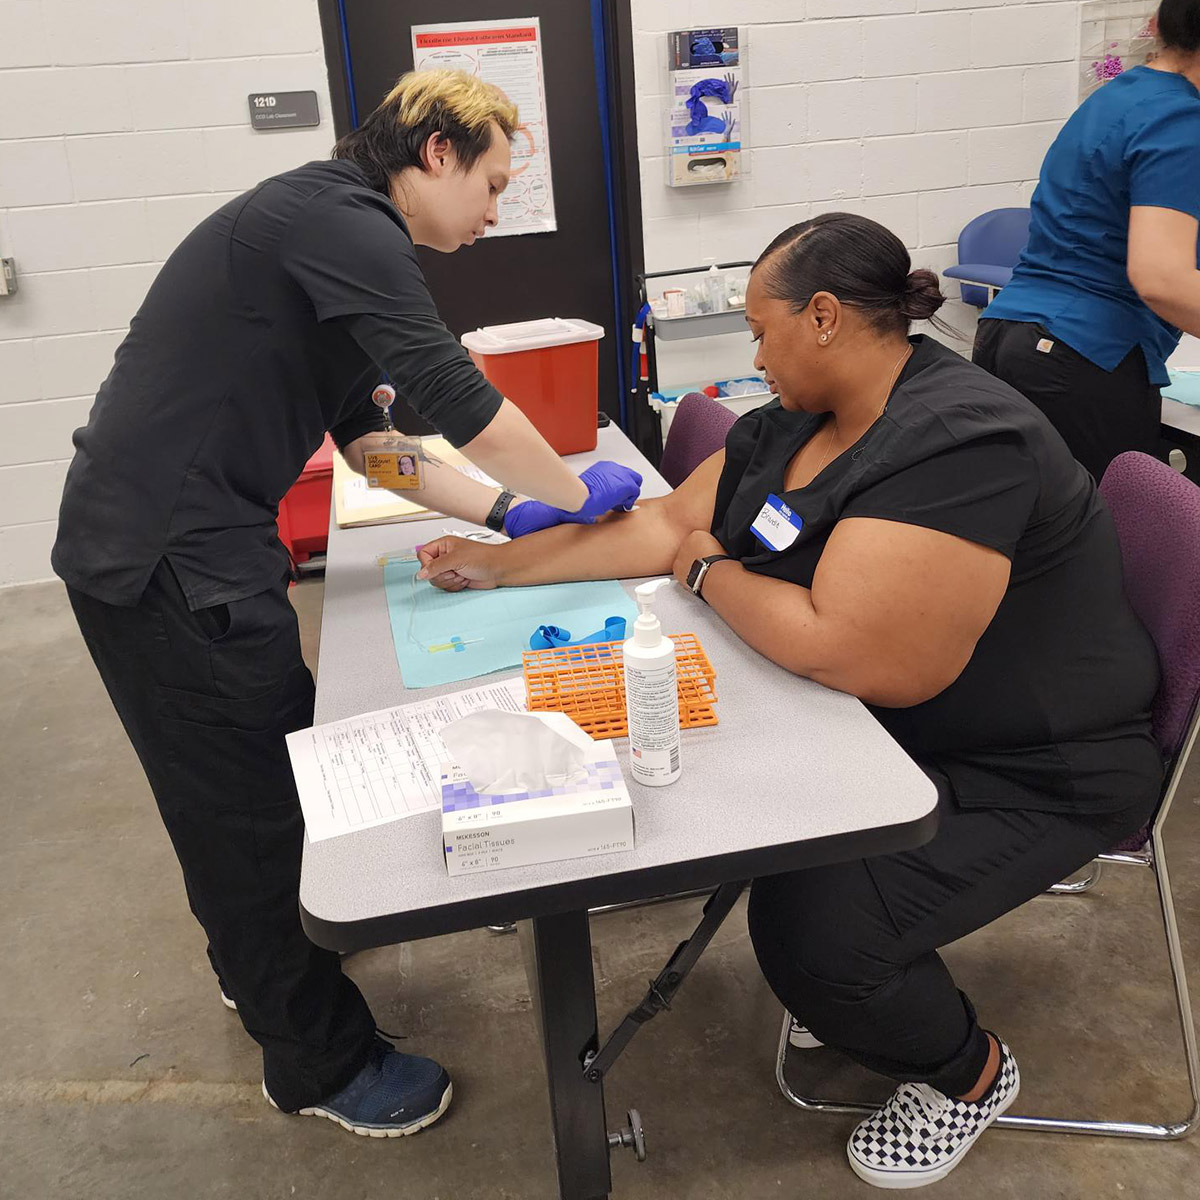 CCD phlebotomy students drawing blood